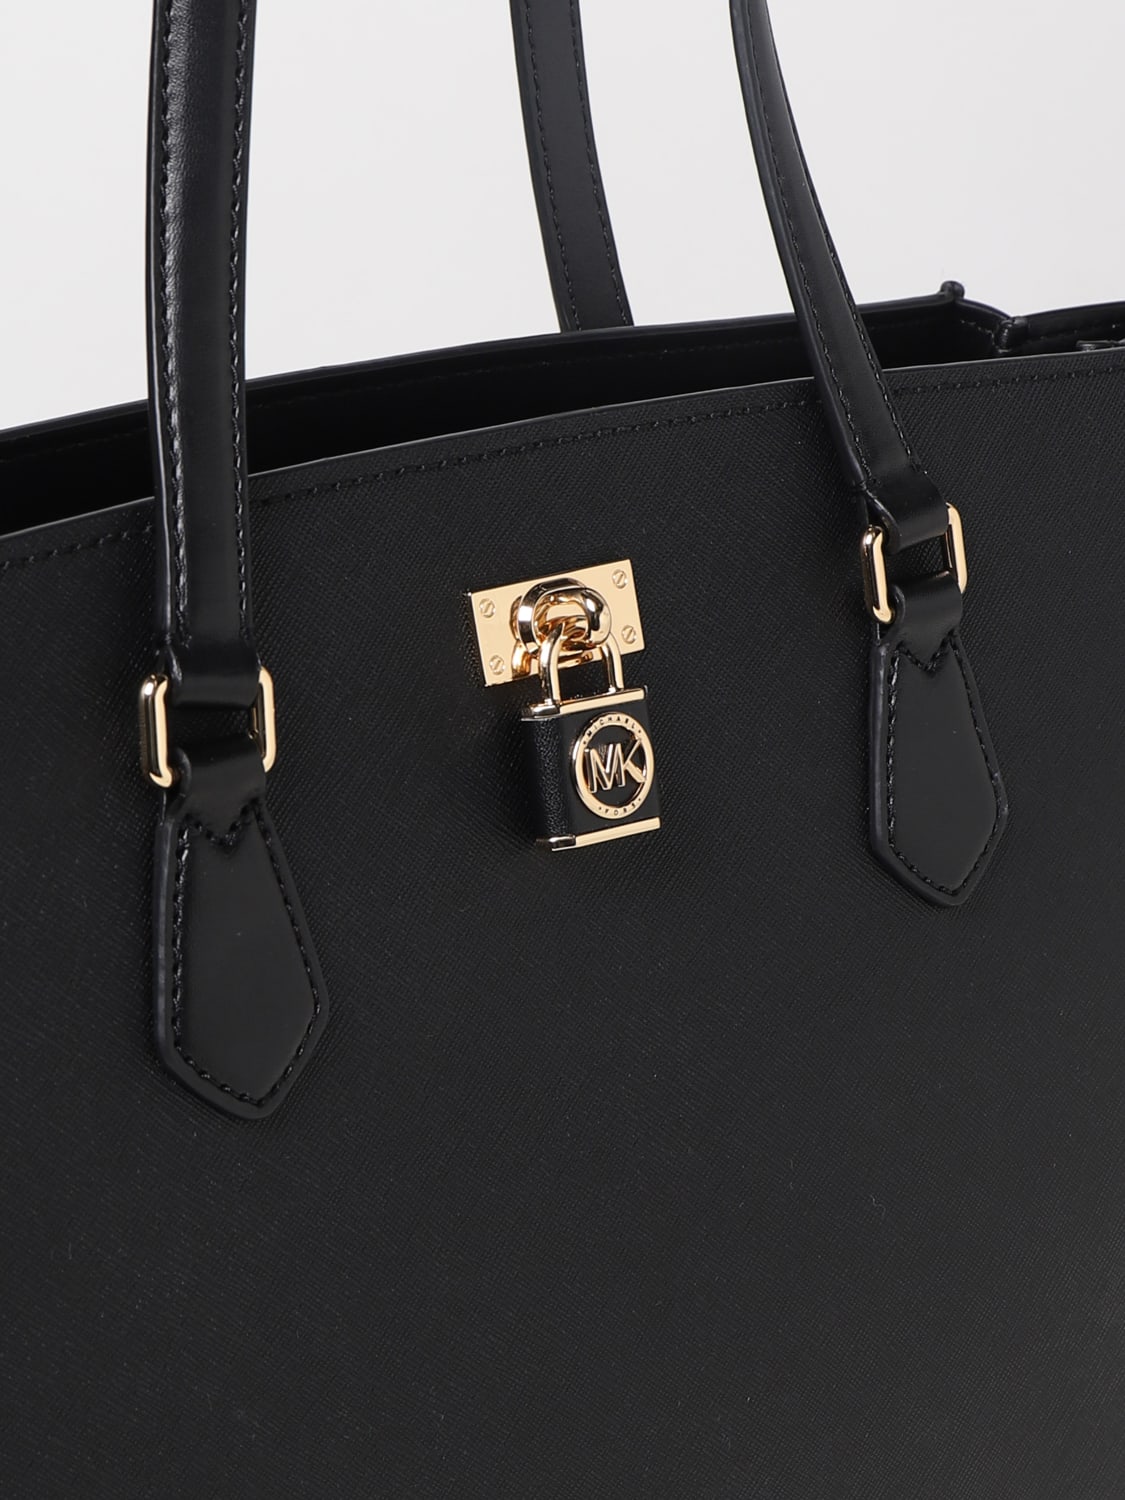 Michael Kors Outlet: Michael Ruby bag in saffiano leather - Black